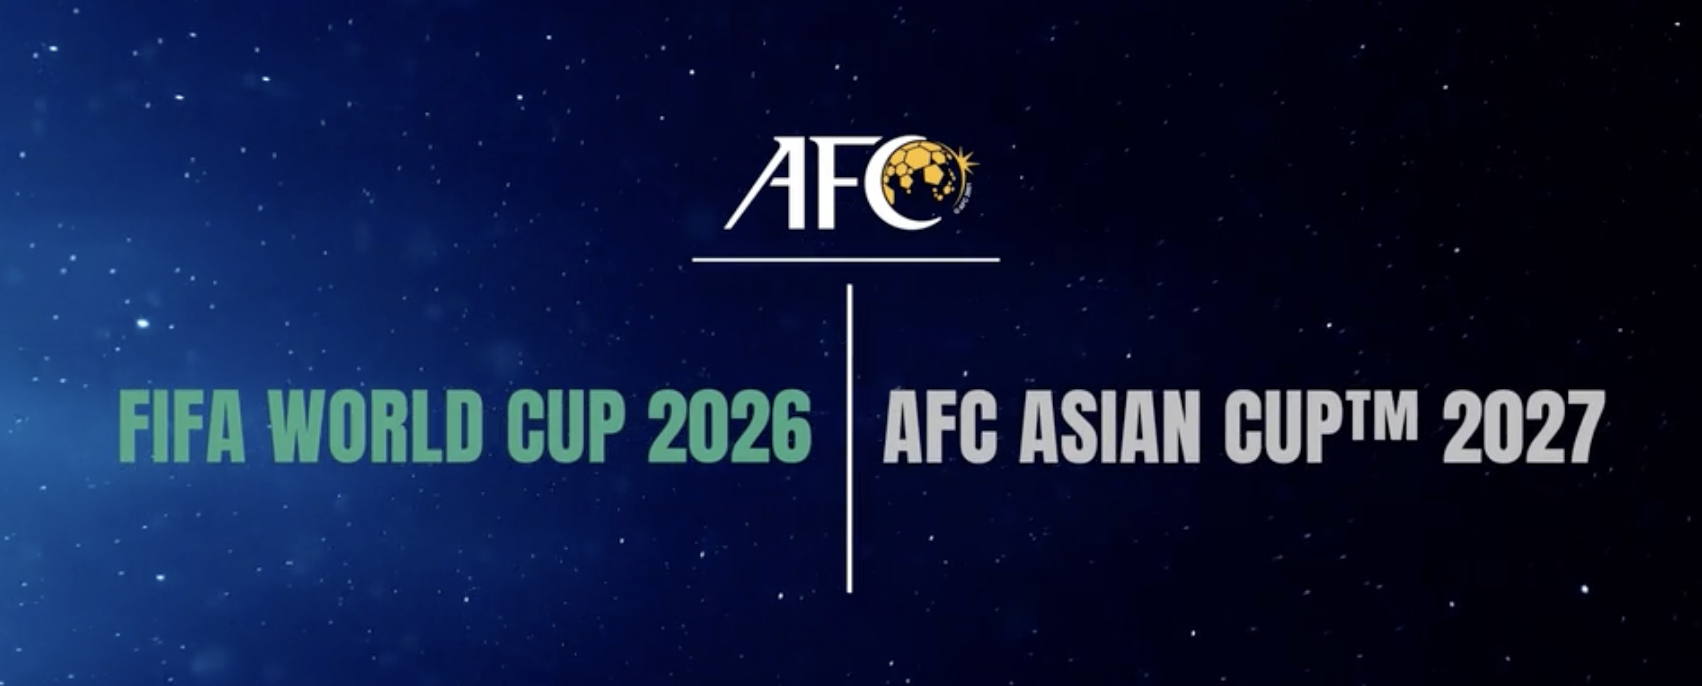 AFC outlines qualification pathway for World Cup 2026 and Asian Cup 2027 - Inside World Football